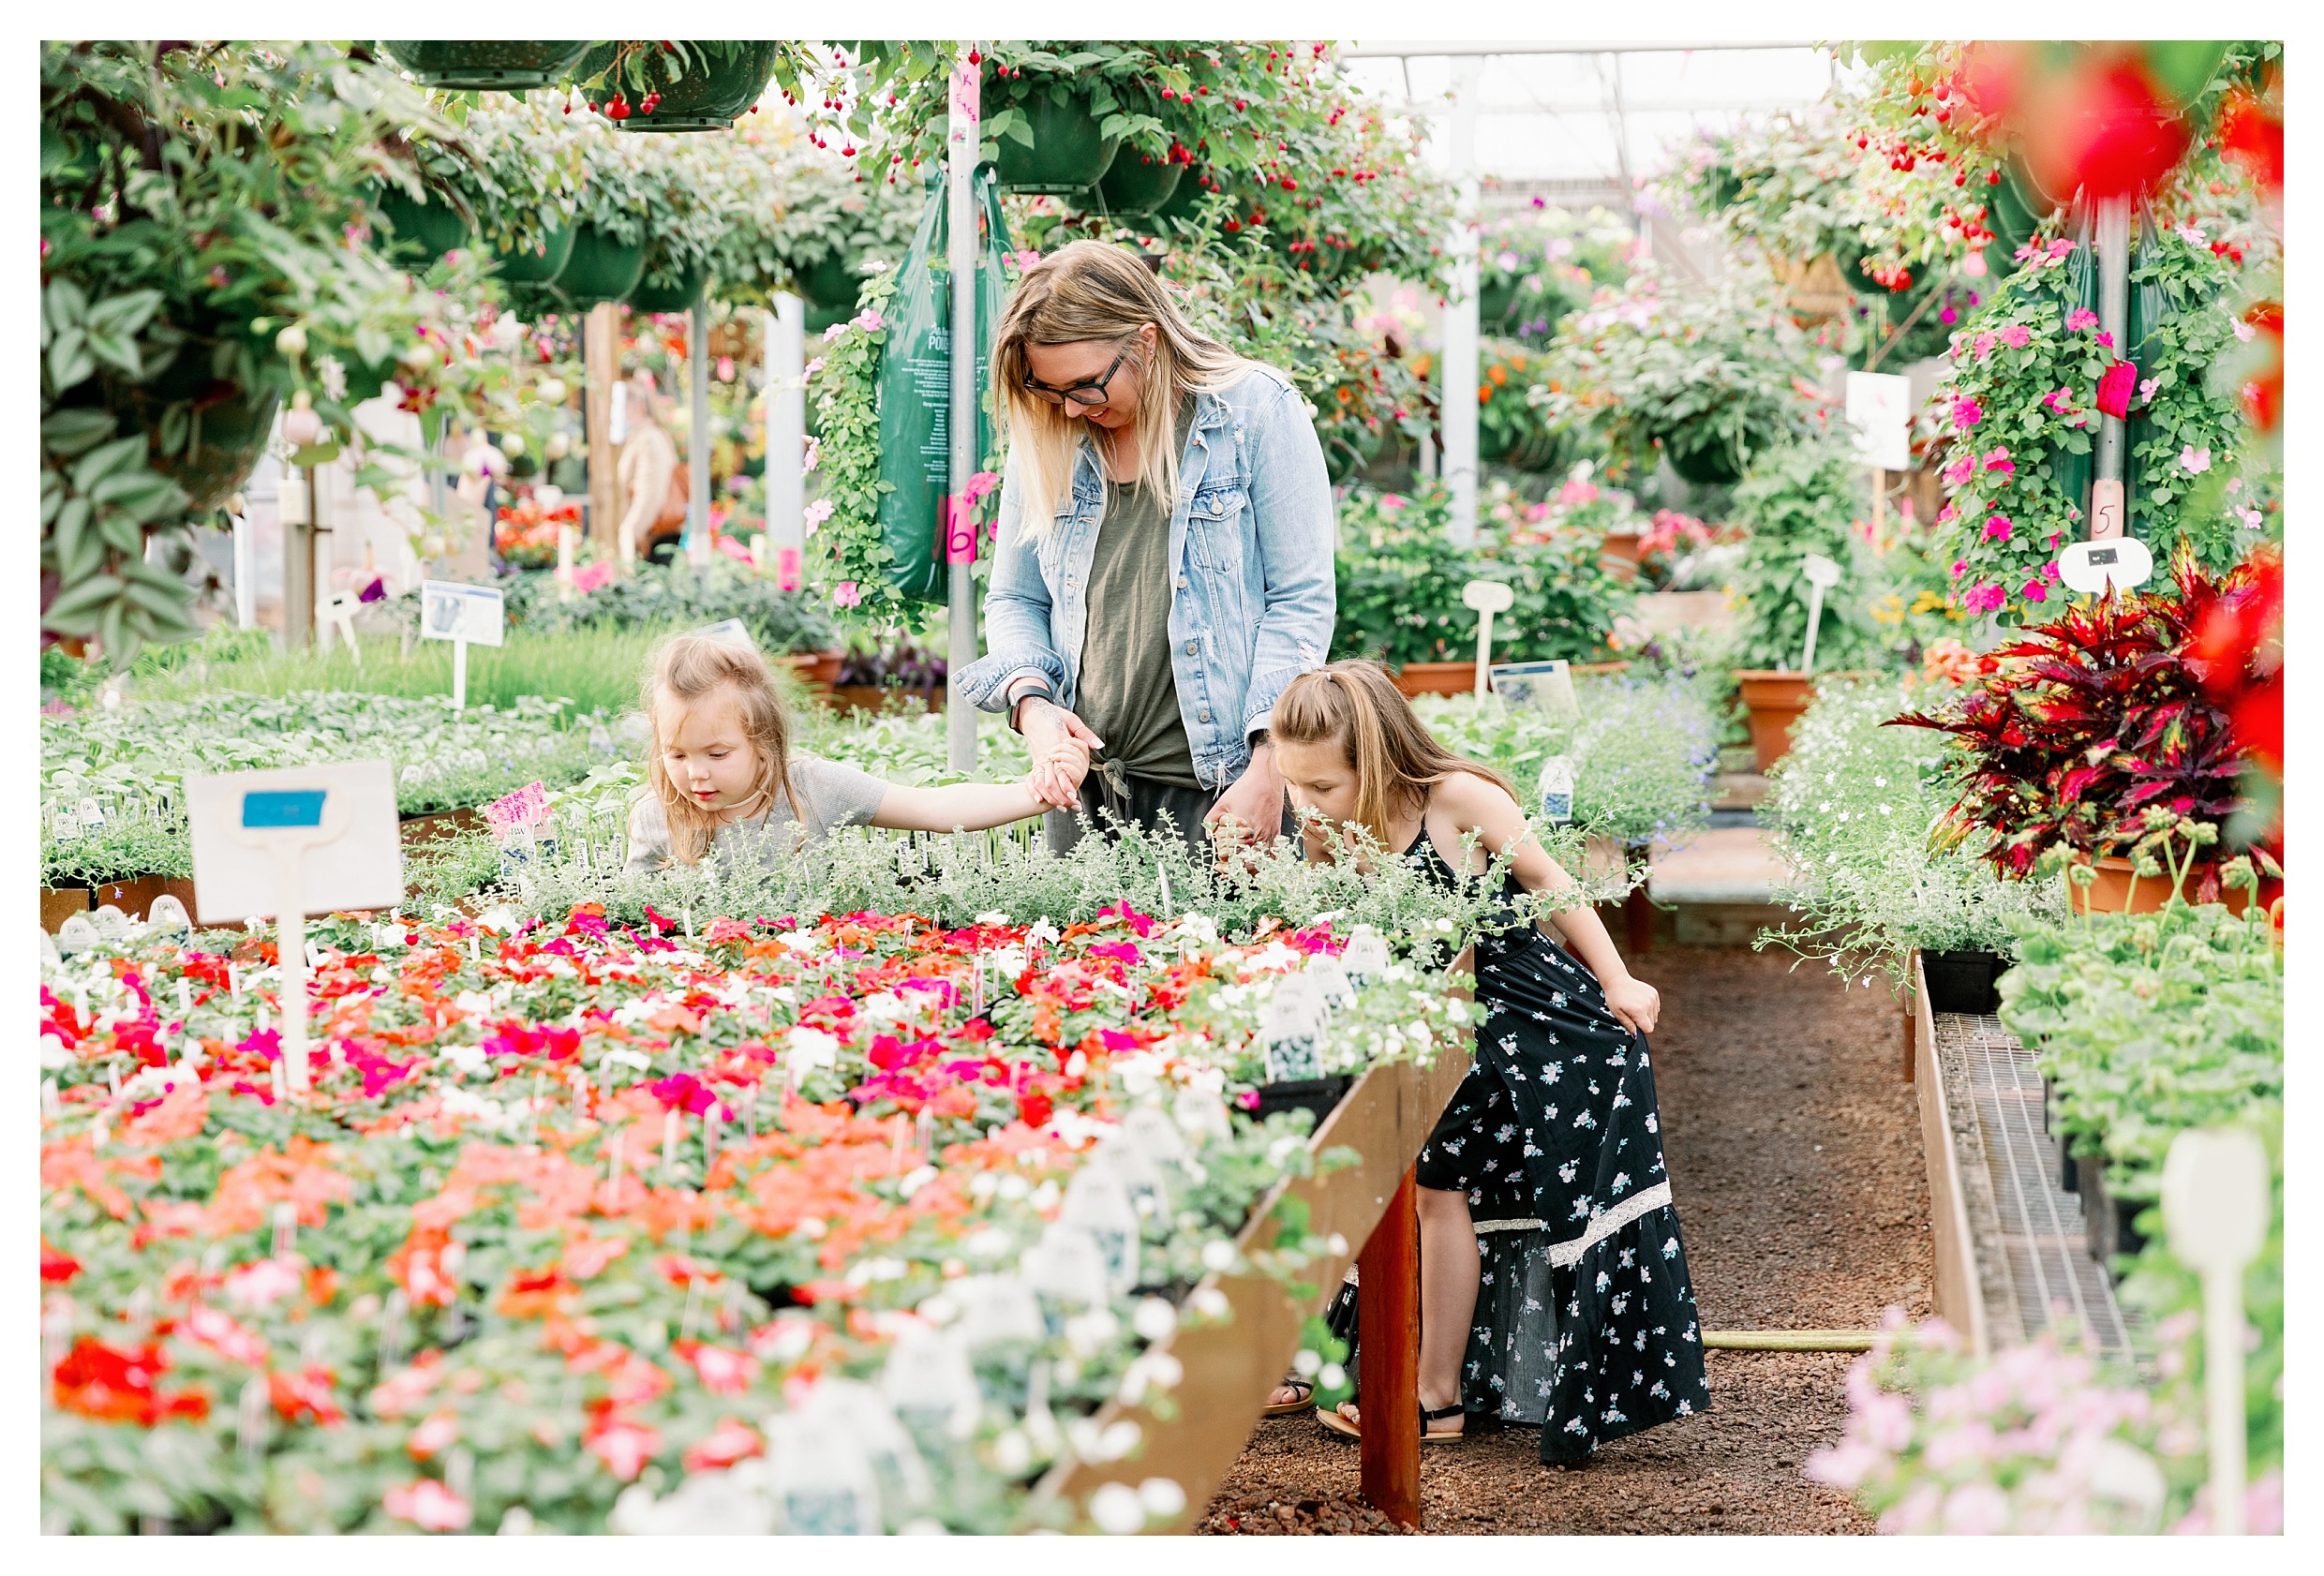 mom and kids pose in greenhouse at Rib Mountain Greenhouse